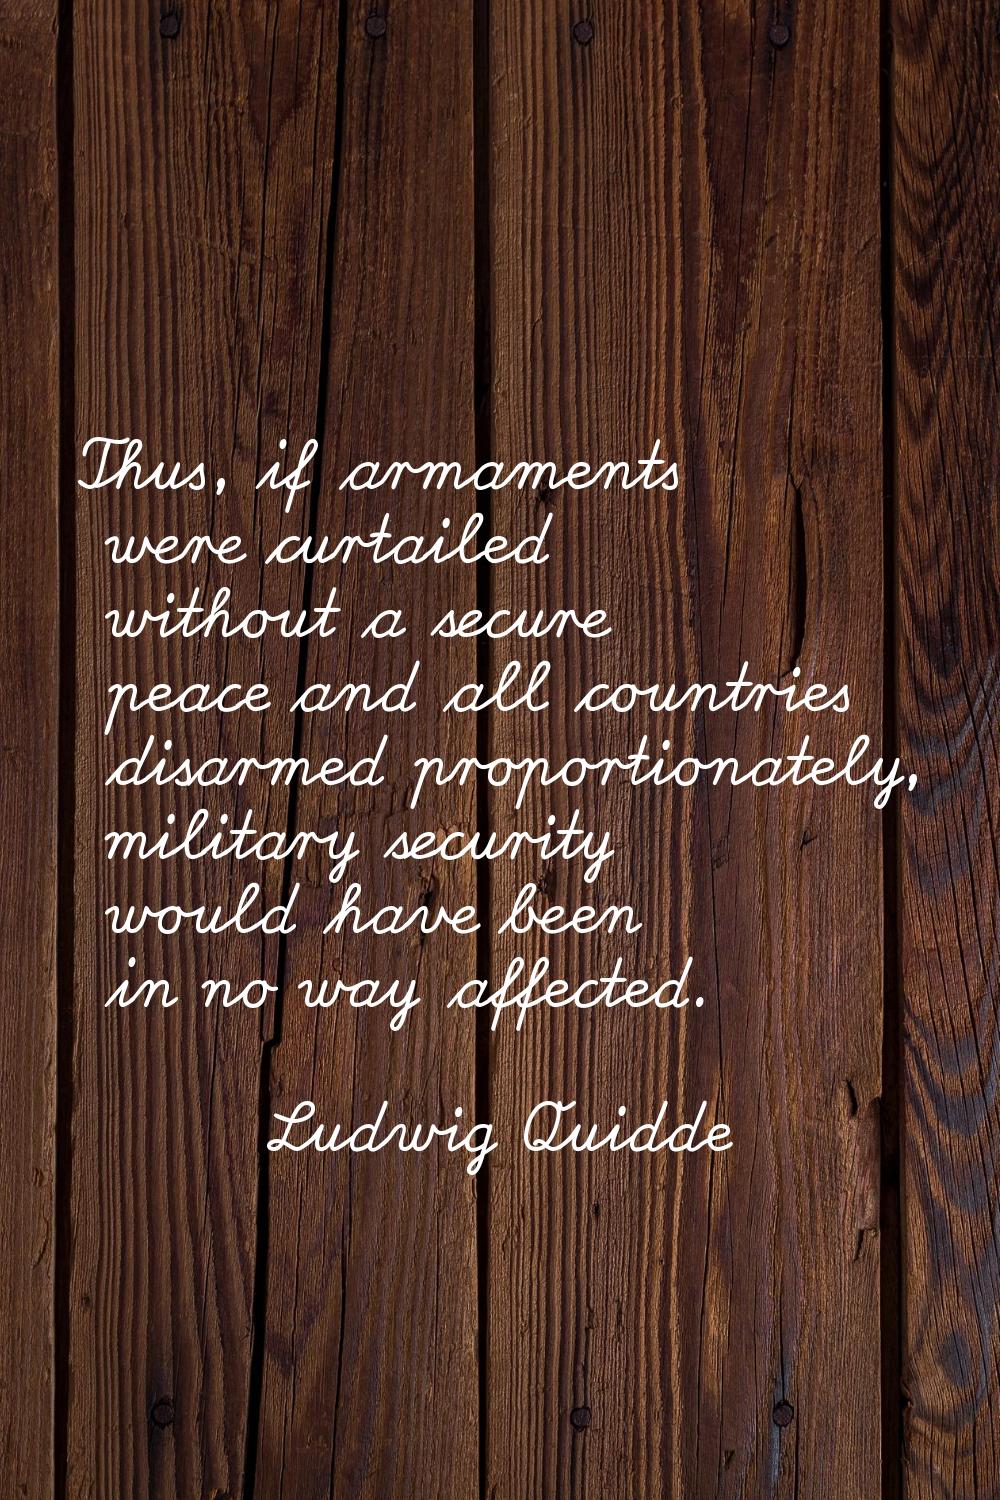 Thus, if armaments were curtailed without a secure peace and all countries disarmed proportionately